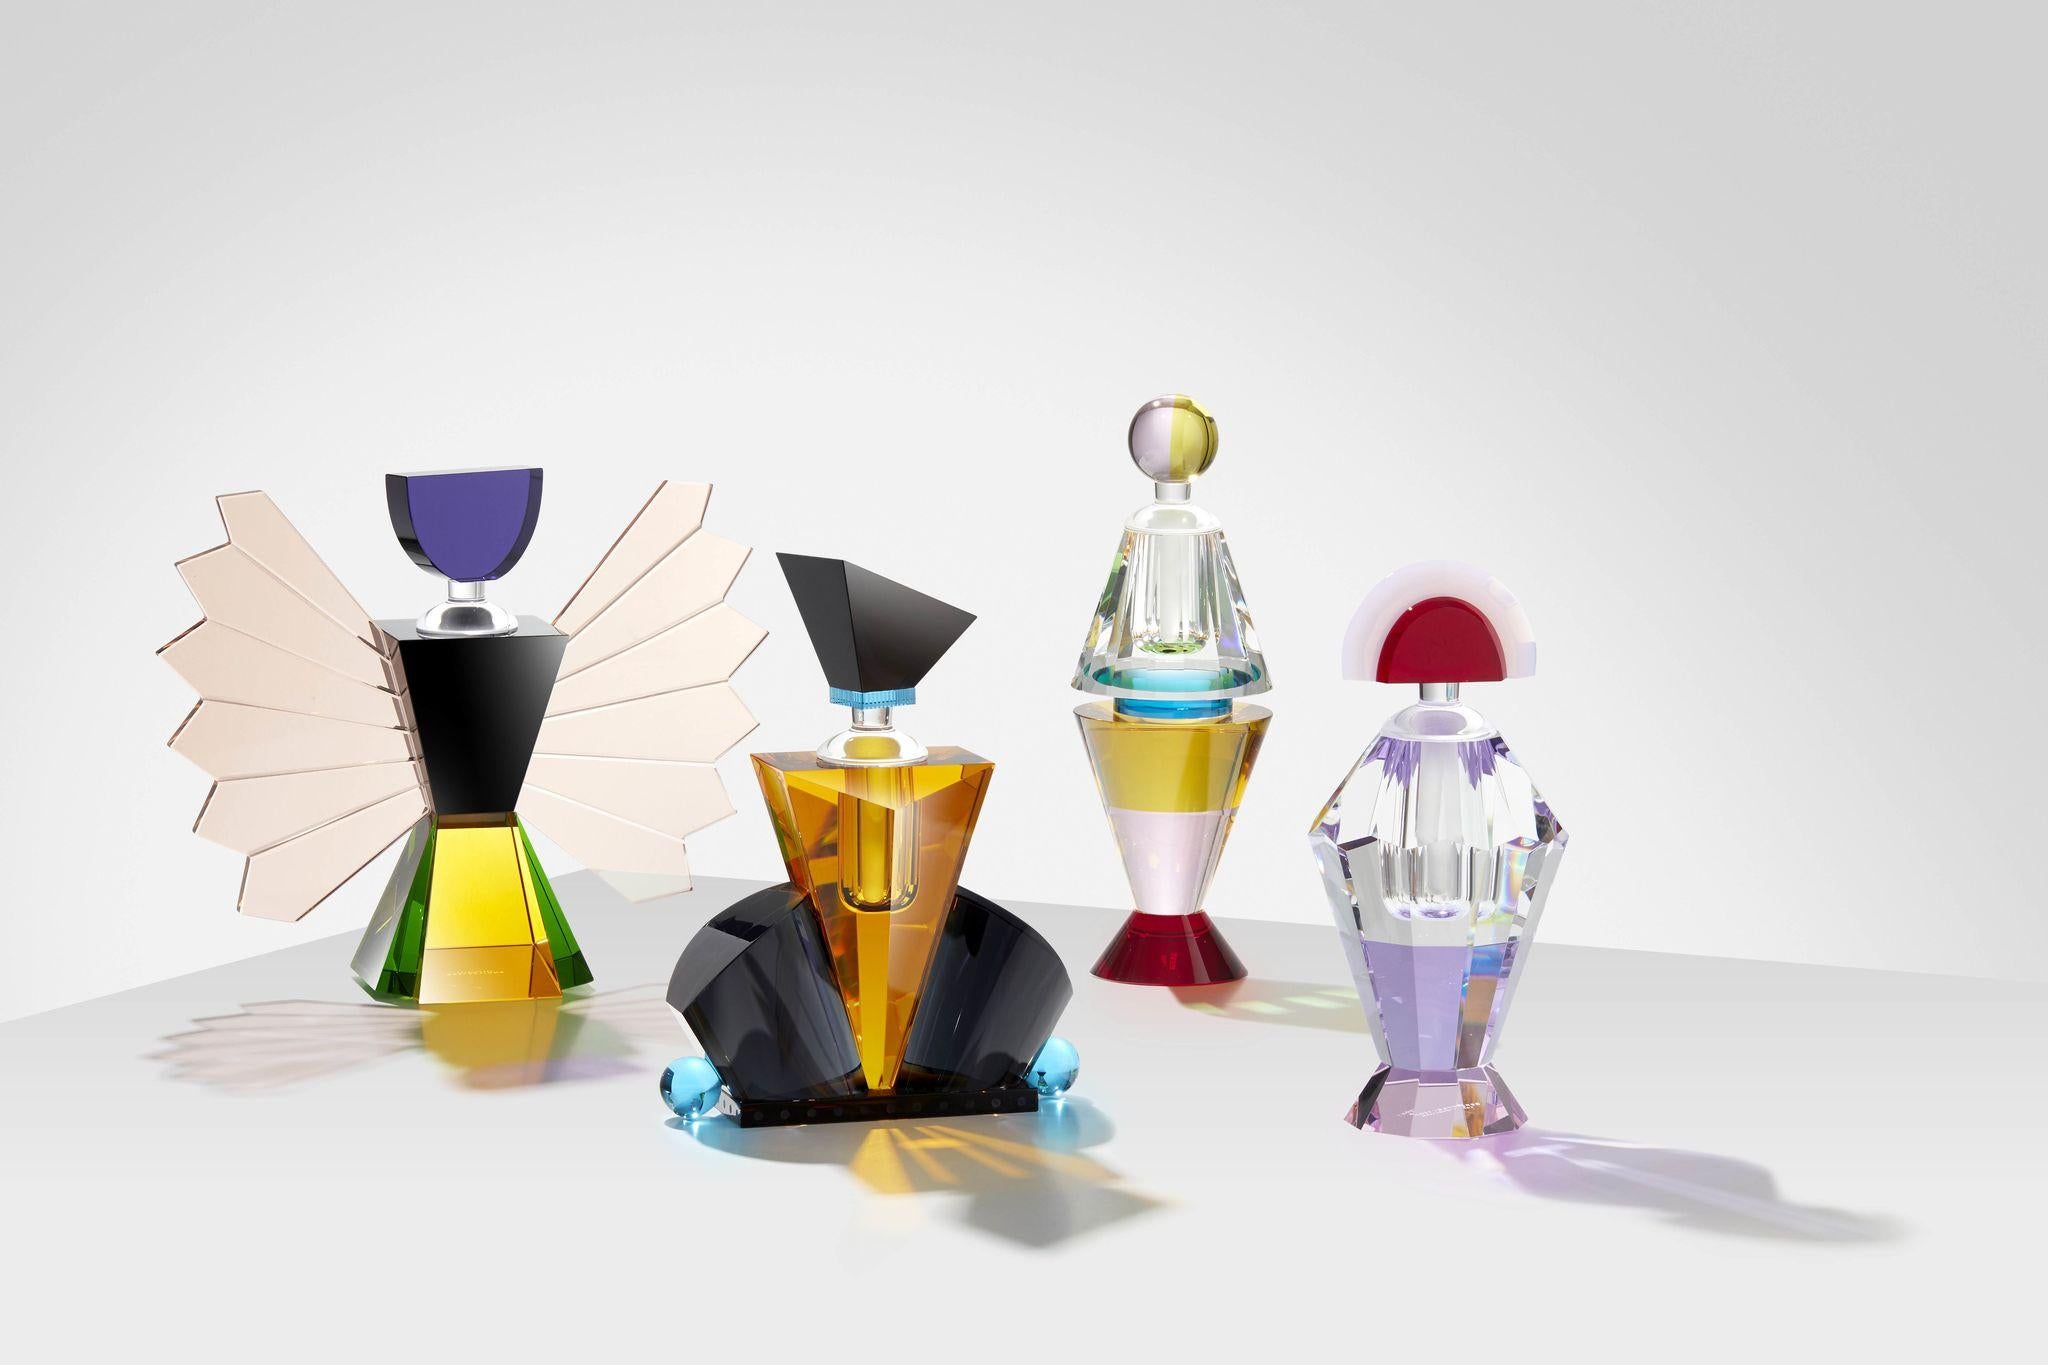 For AW20, Reflections Copenhagen has also designed four extravagant grand perfume flacons with a substantial, distinct, and magical appearance with an additional touch of vulgarity. The pieces are influenced by vintage boudoirs with a contemporary